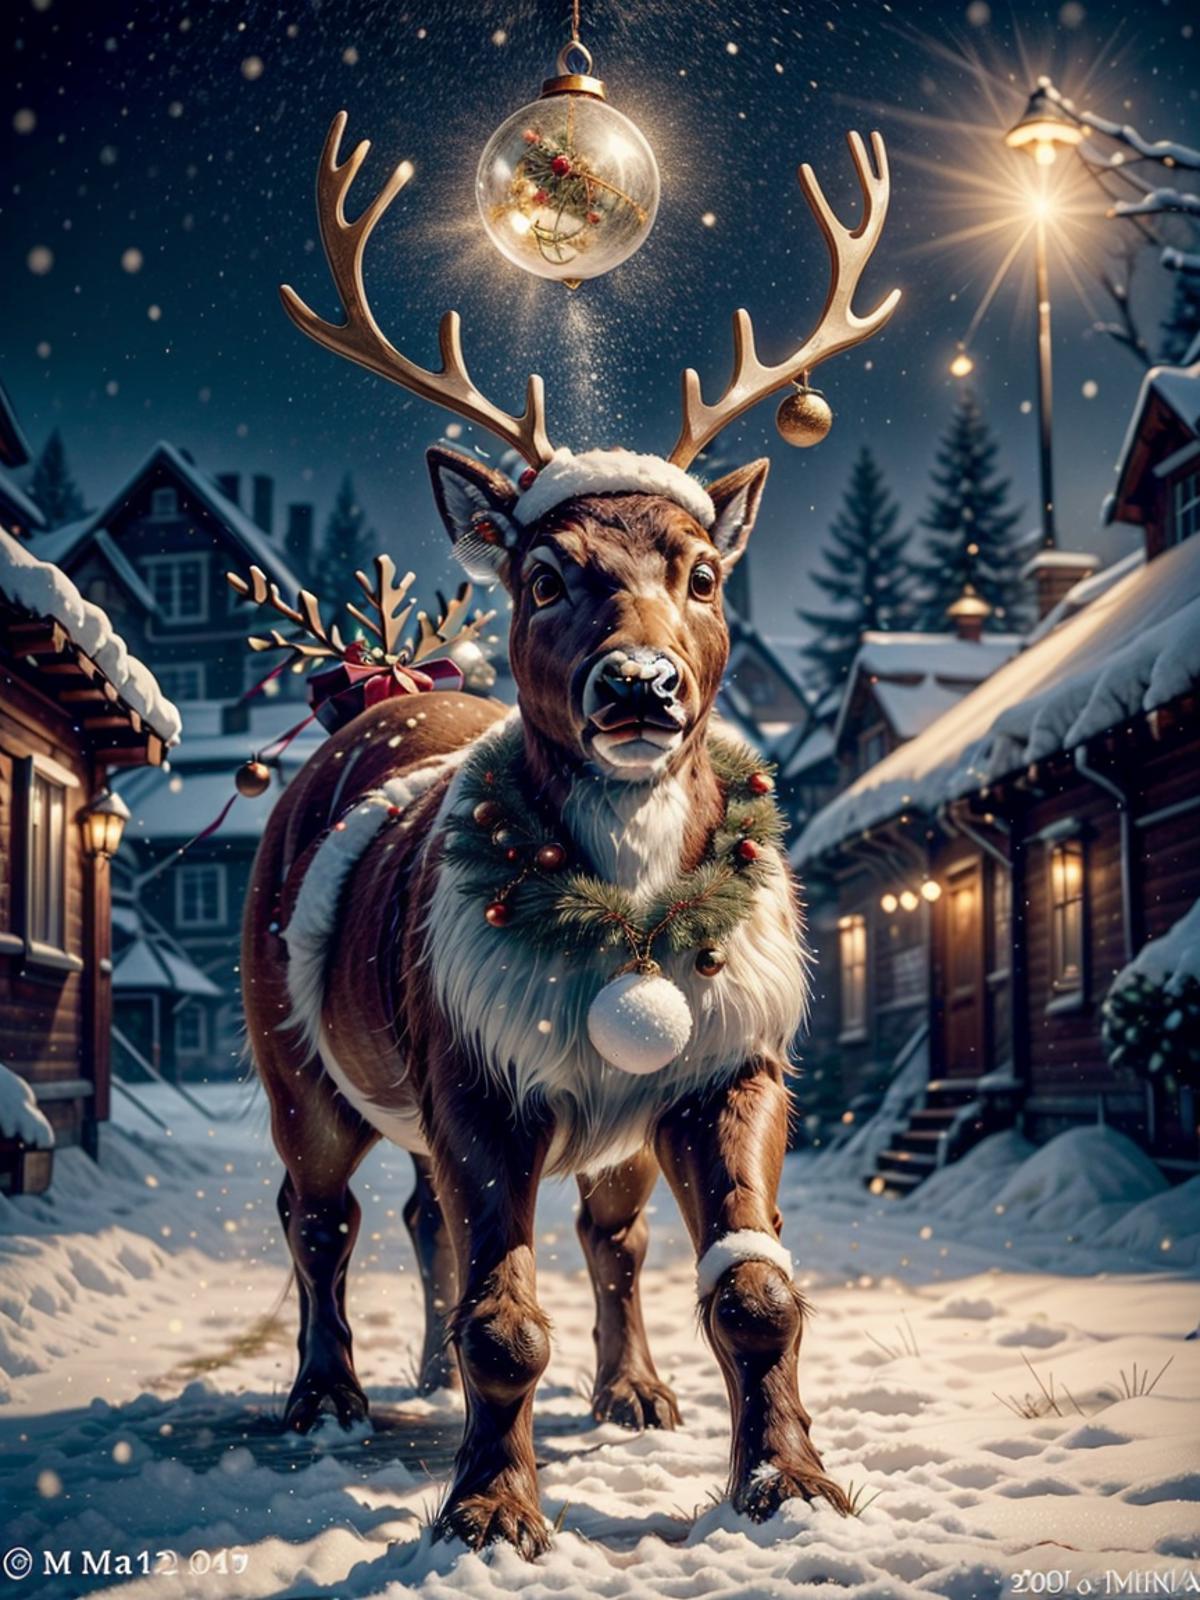 A snowy Christmas scene with a reindeer and a lighted globe.